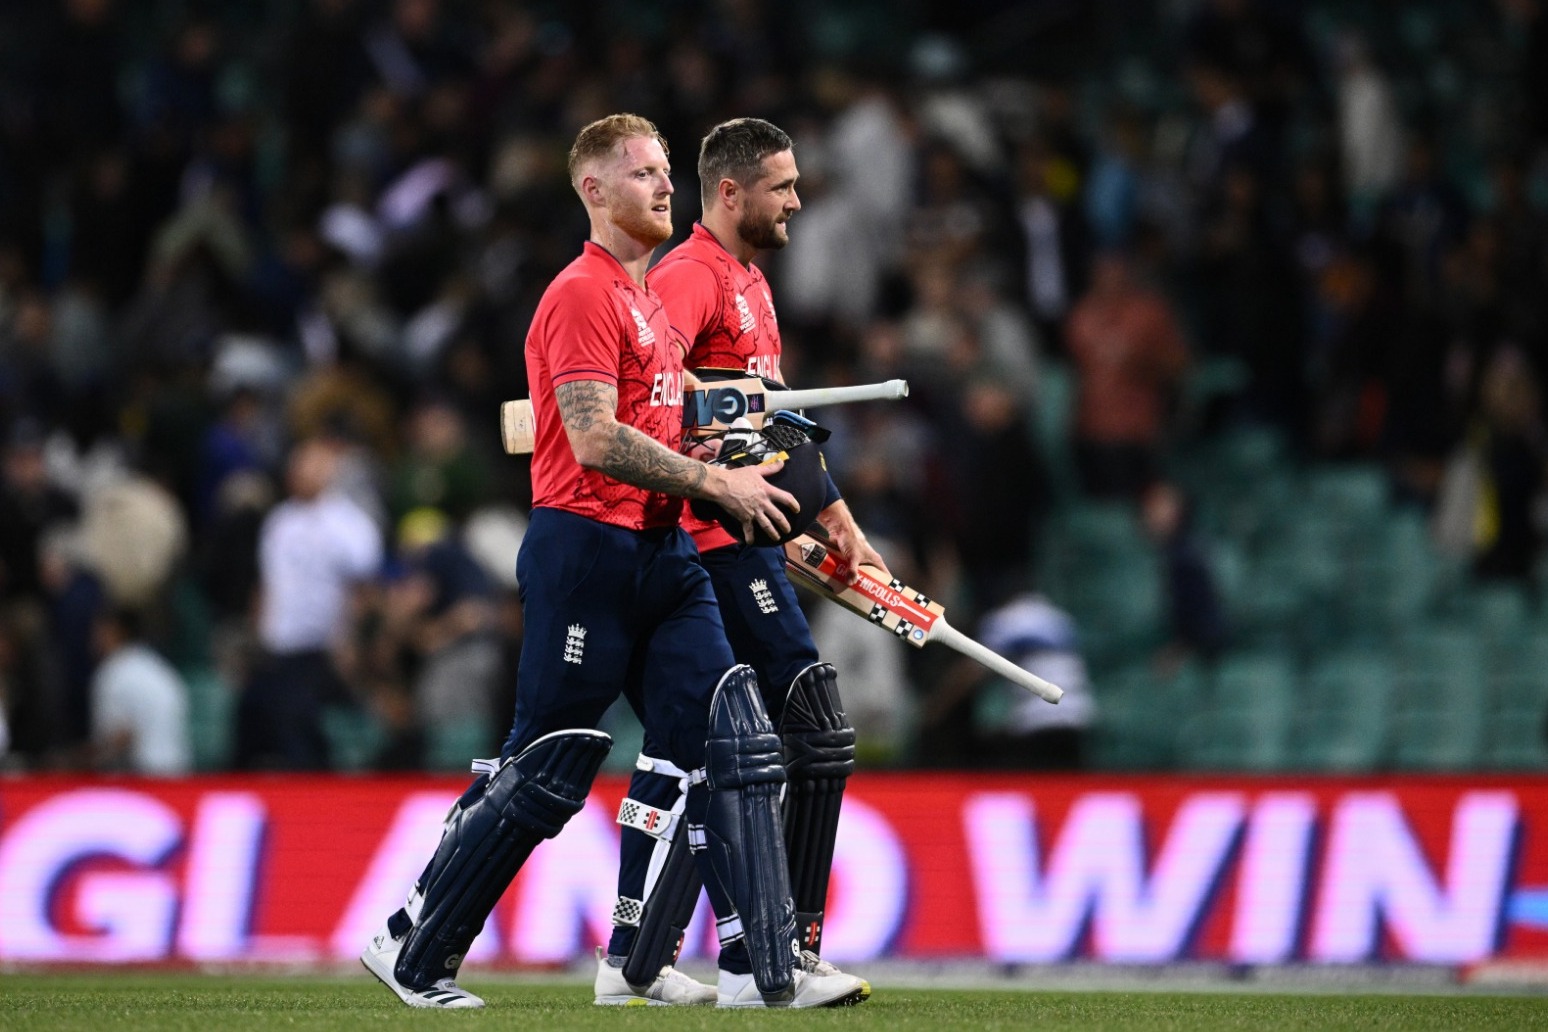 Ben Stokes and Chris Woakes stay cool to fire England into World Cup semi-finals 